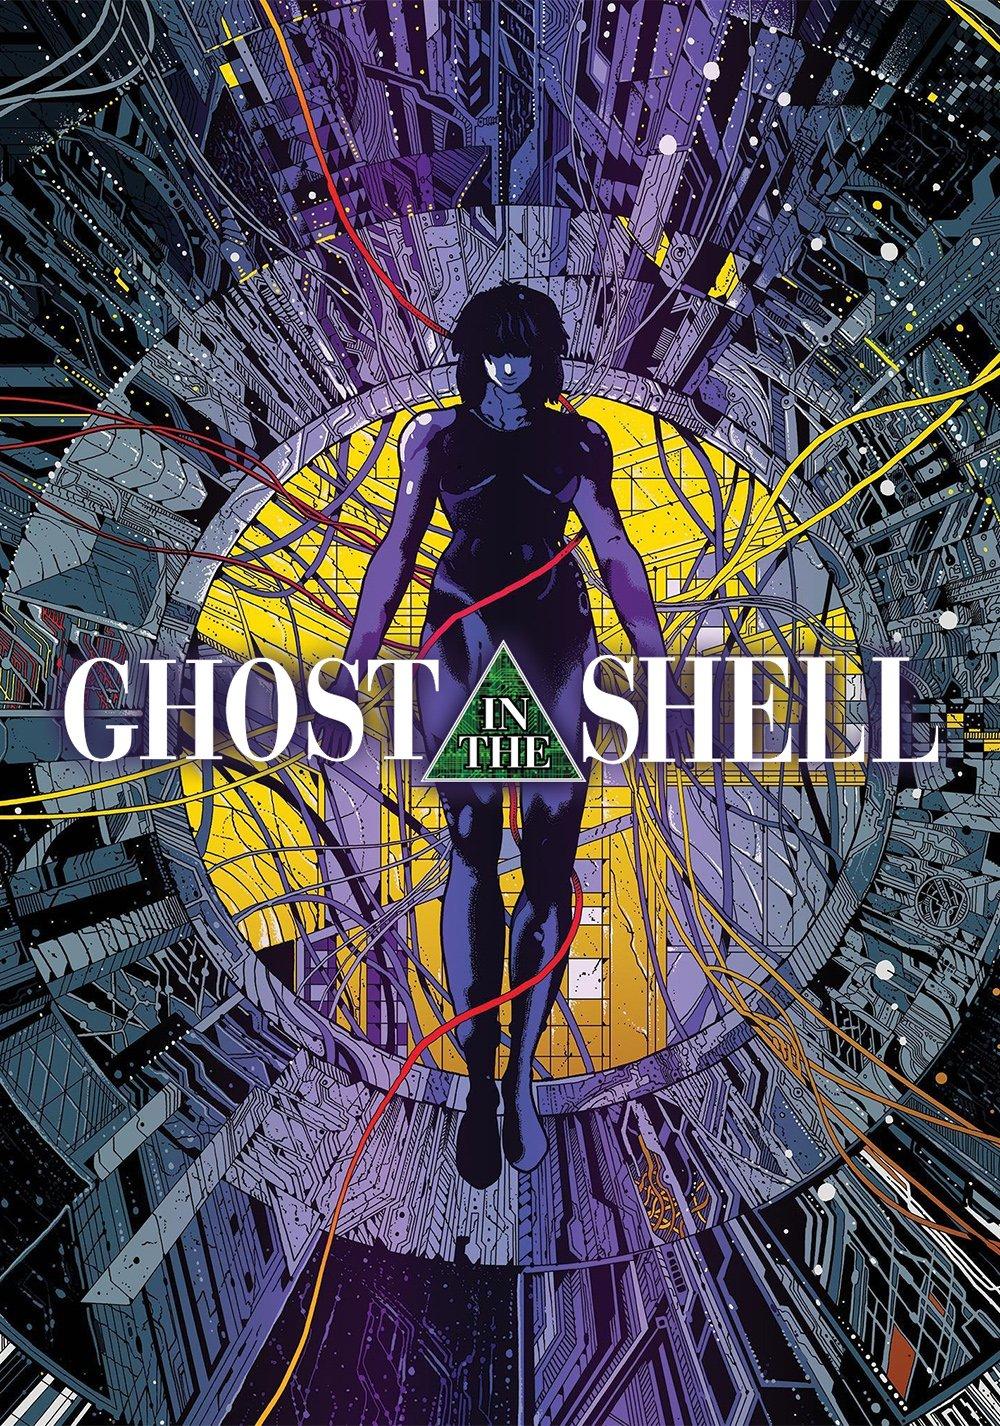 Poster phim Ghost in the Shell . (Nguồn: Internet)